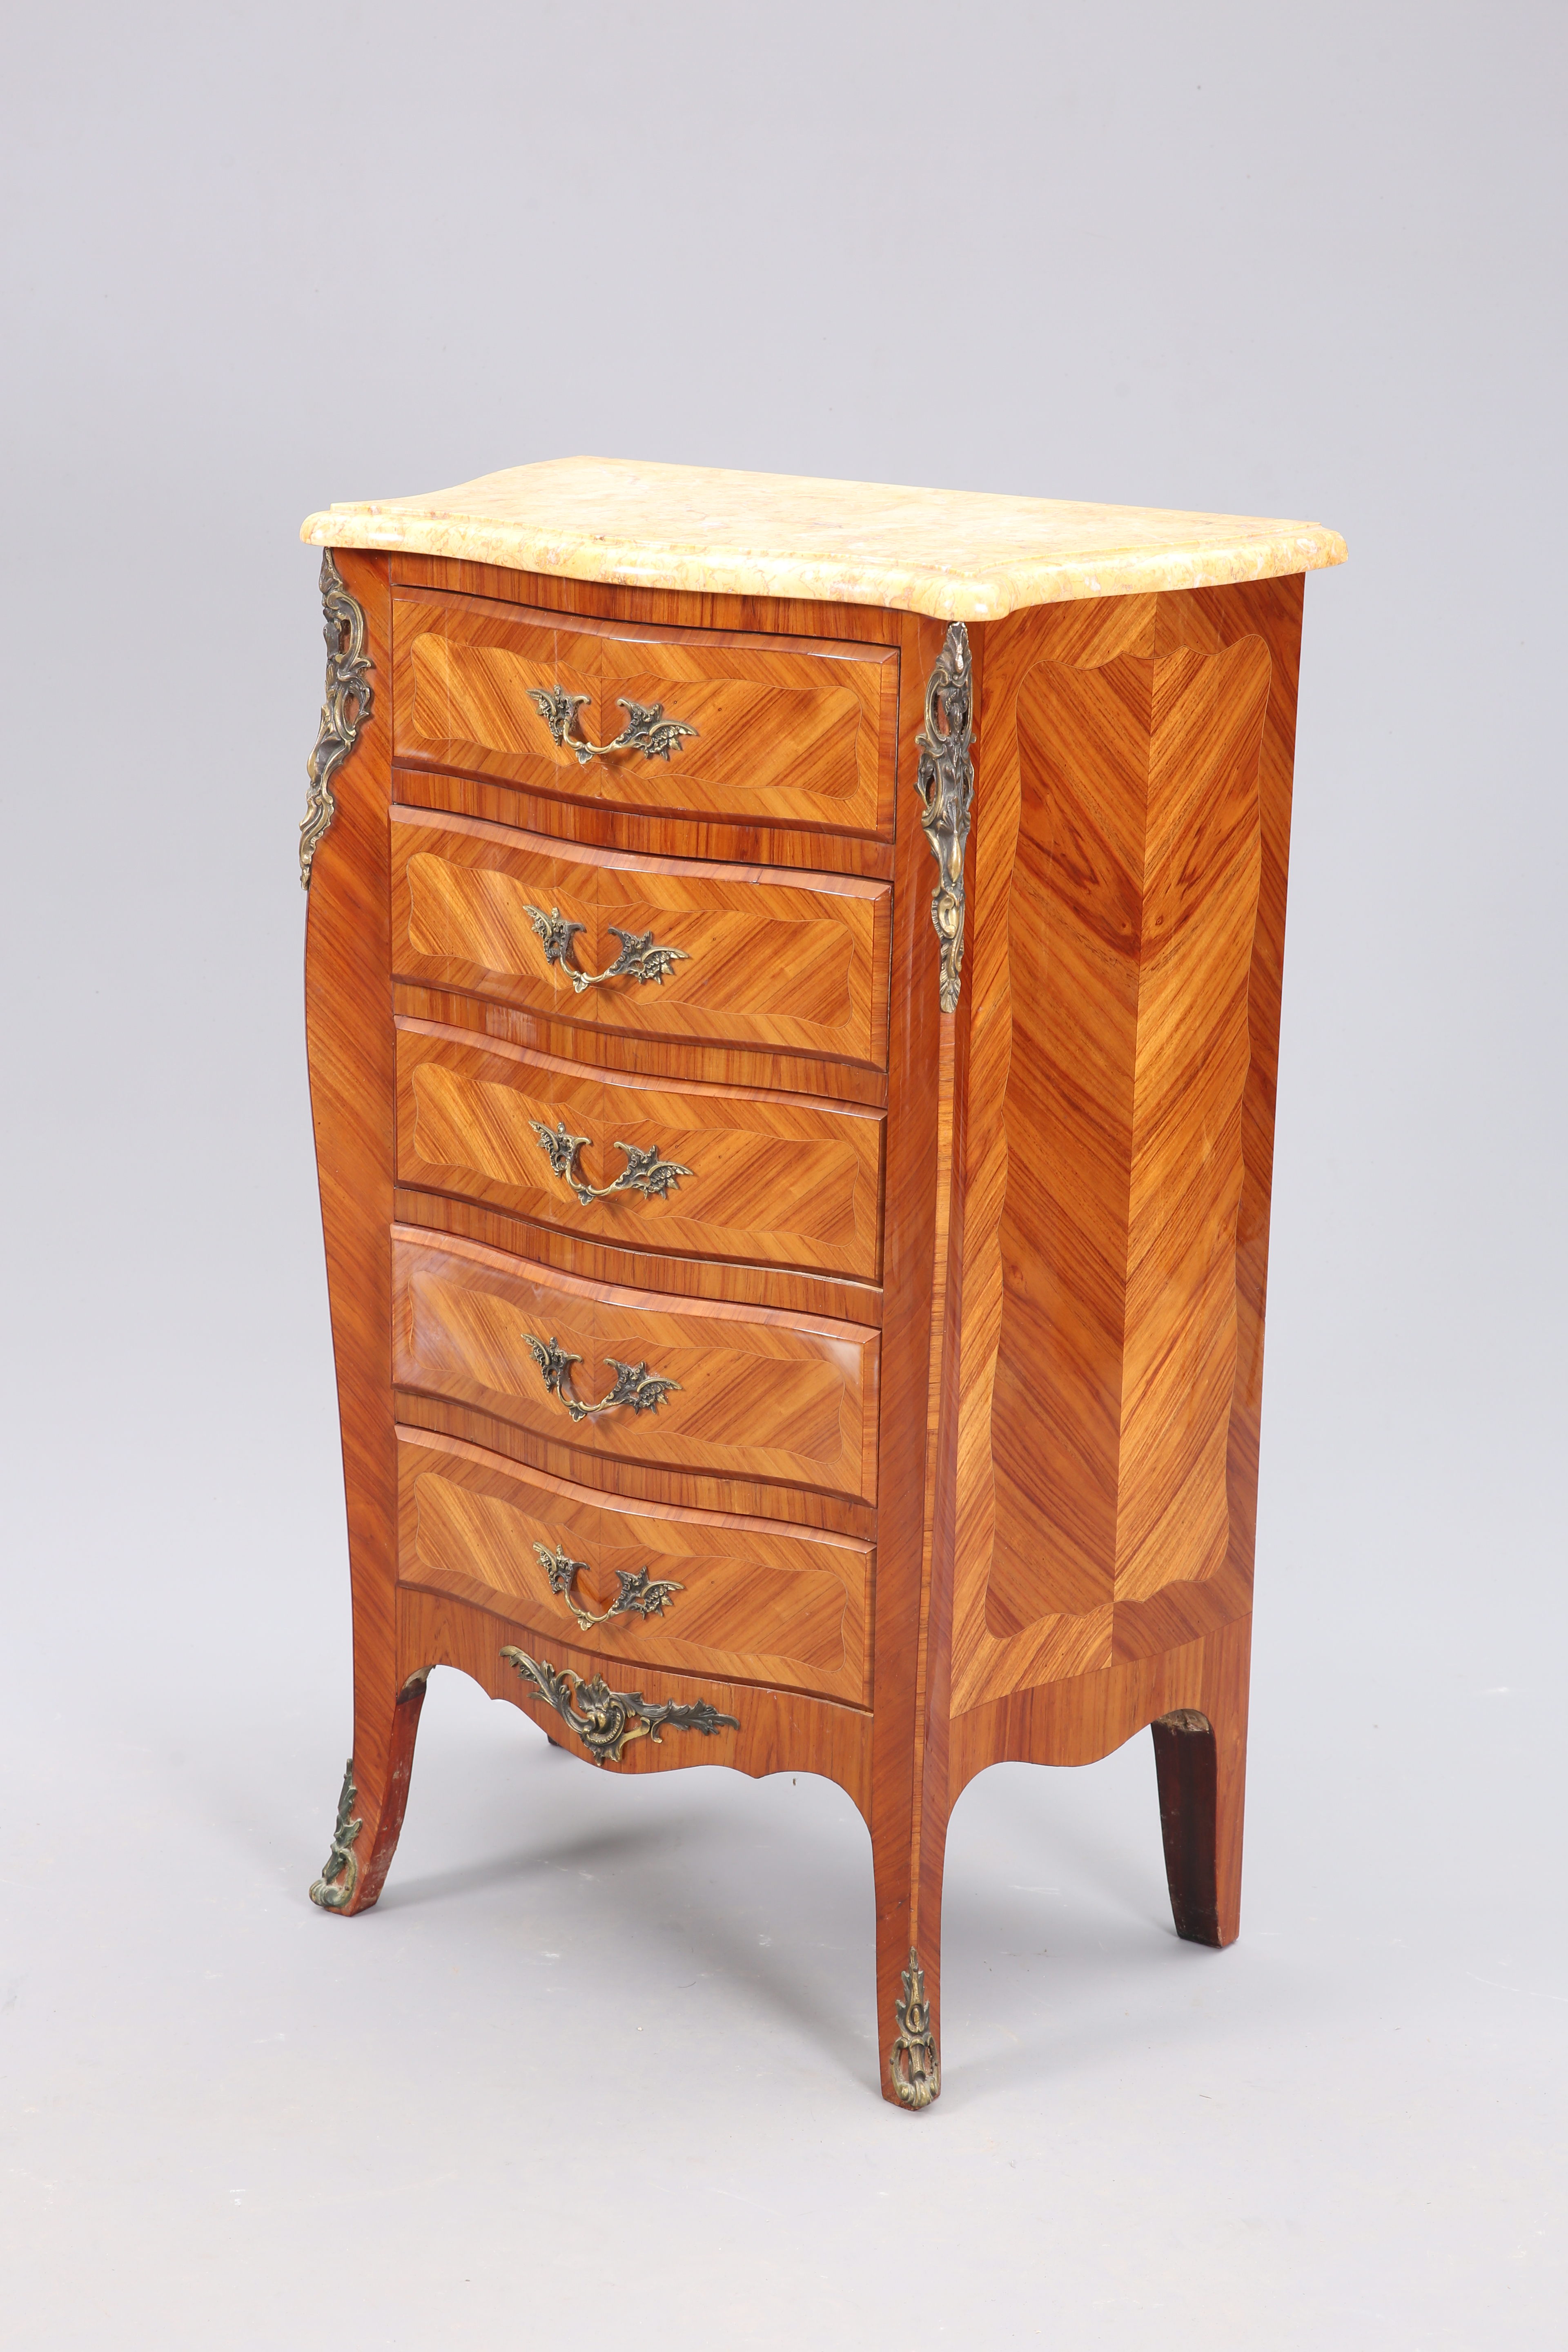 A LOUIS XV STYLE MARBLE-TOPPED SMALL CHEST OF DRAWERS